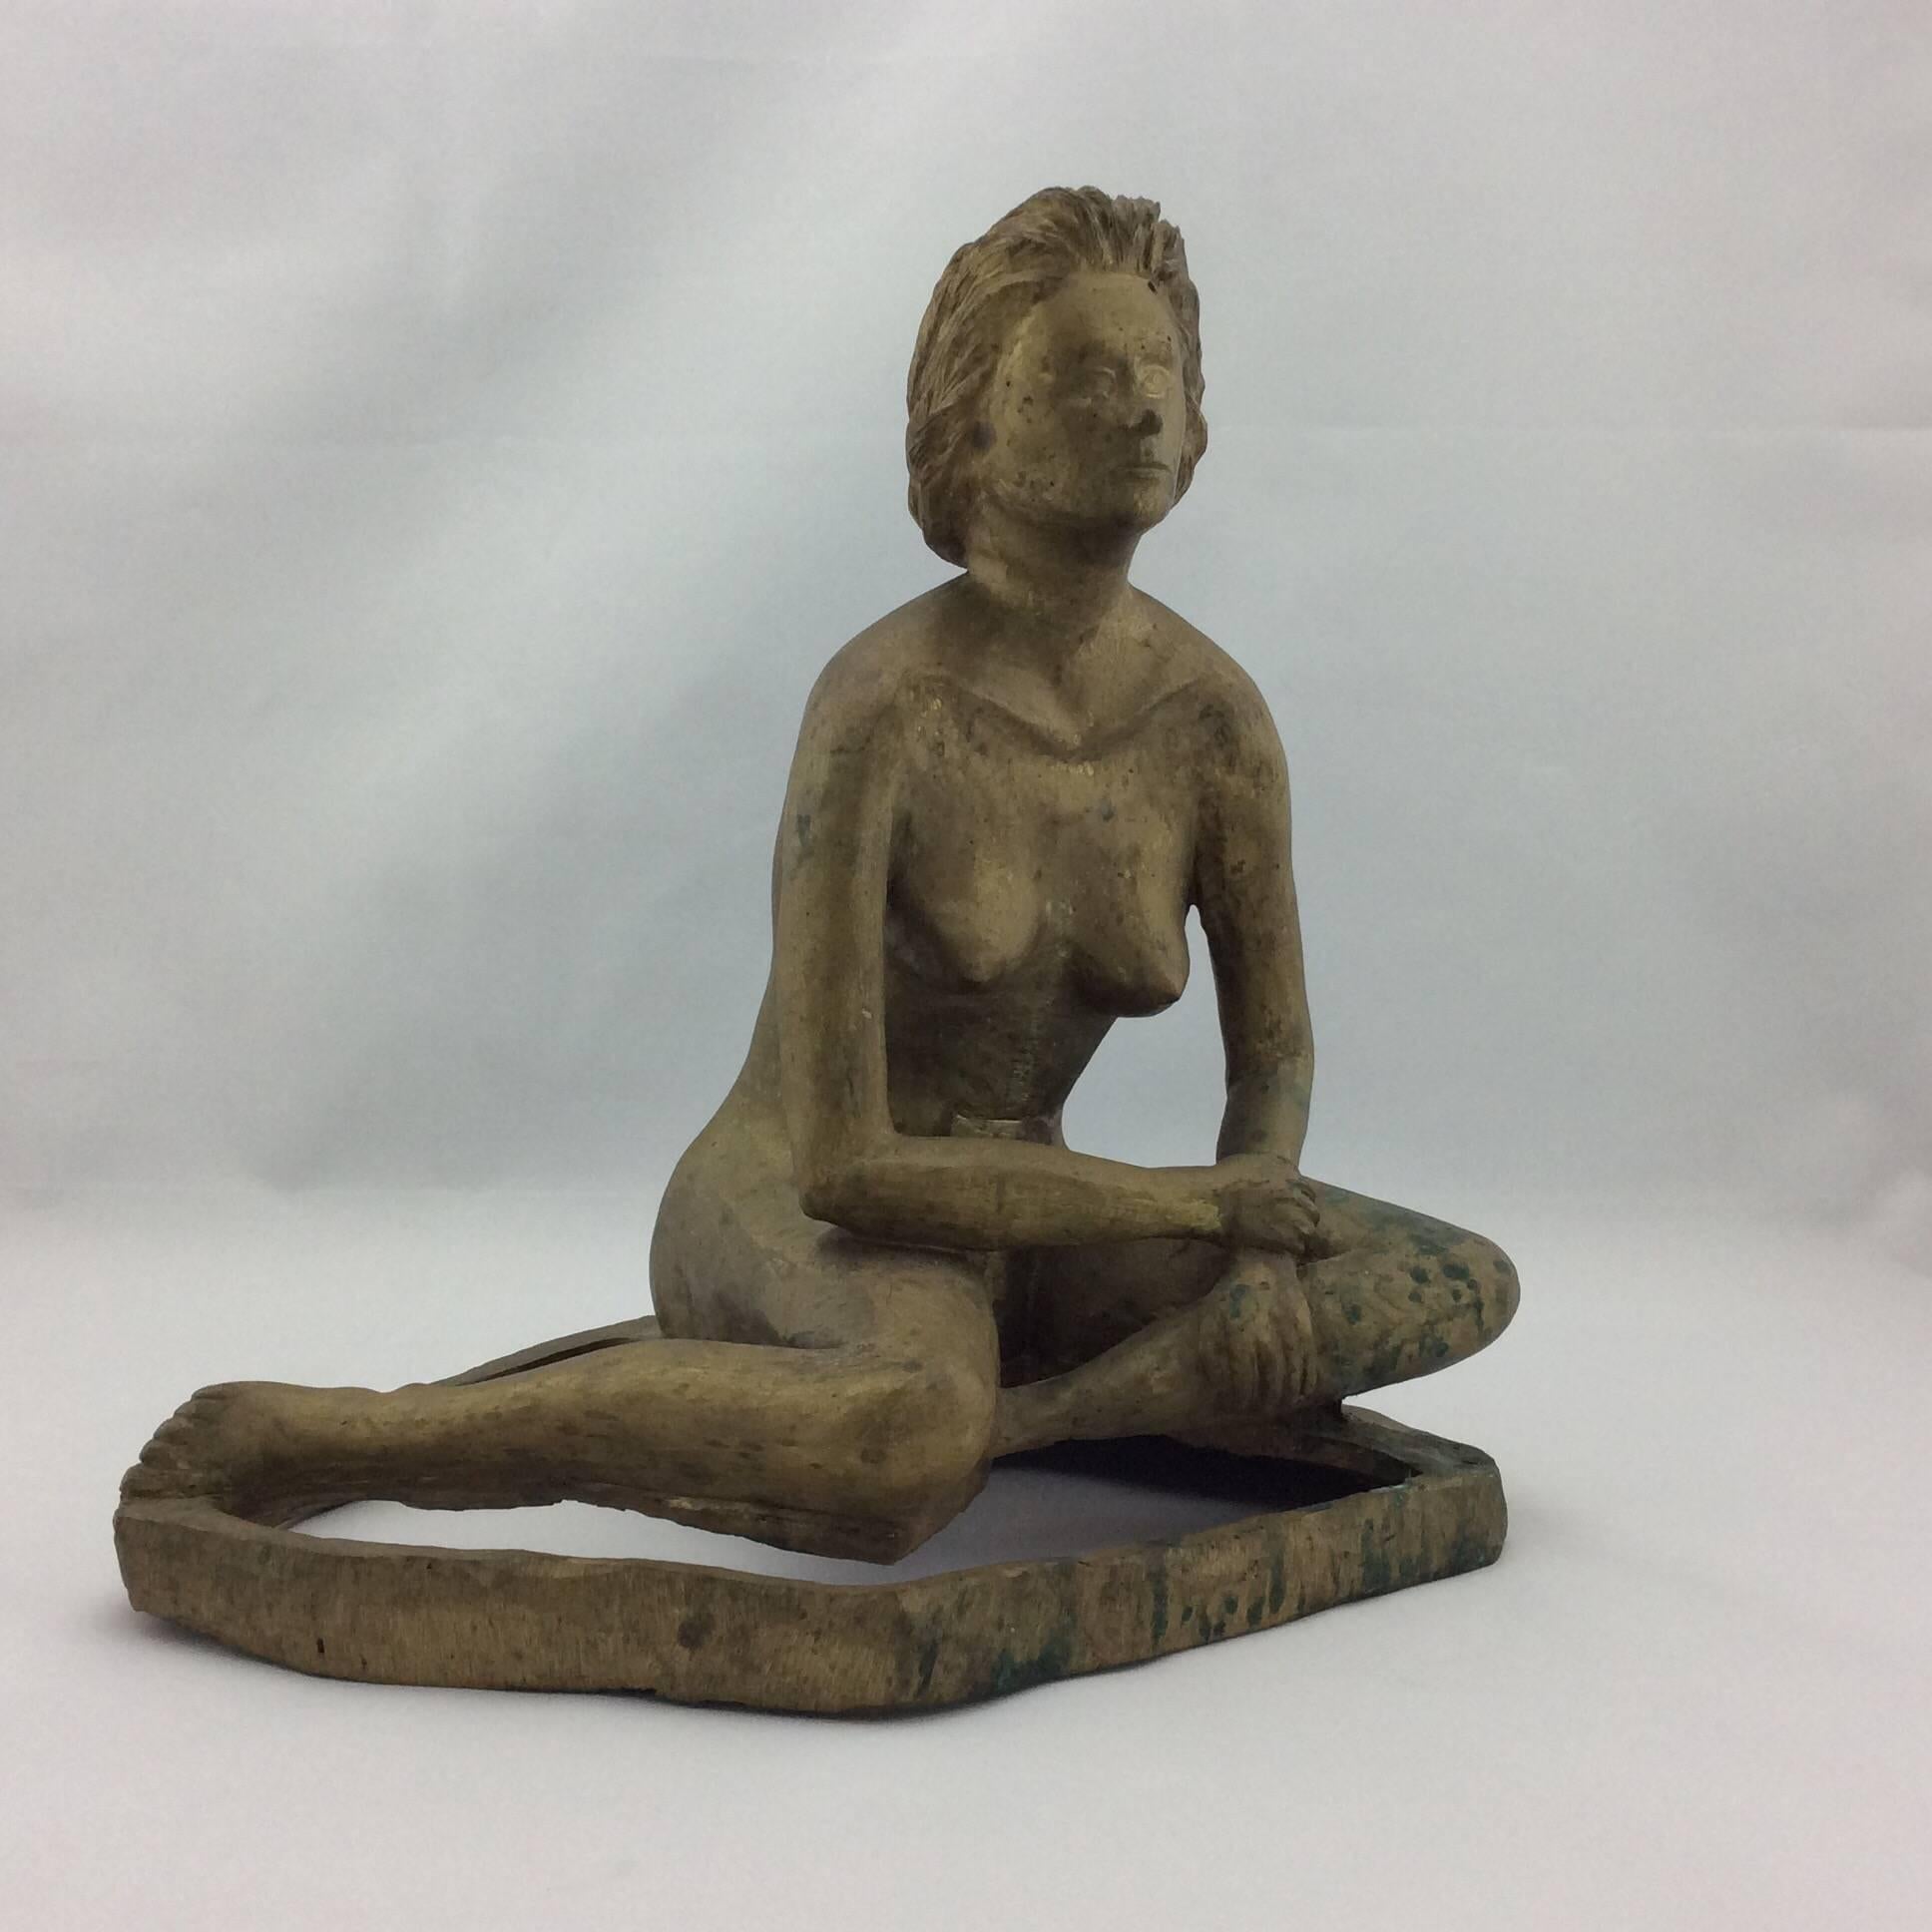 Very unique vintage nude sculpture in brass with great patina. Over 10 inches tall. Handmade and signed, this brass nude sculpture of a woman sitting is sure to add interest to your collection. Heavy and unique
There are no know issues that would